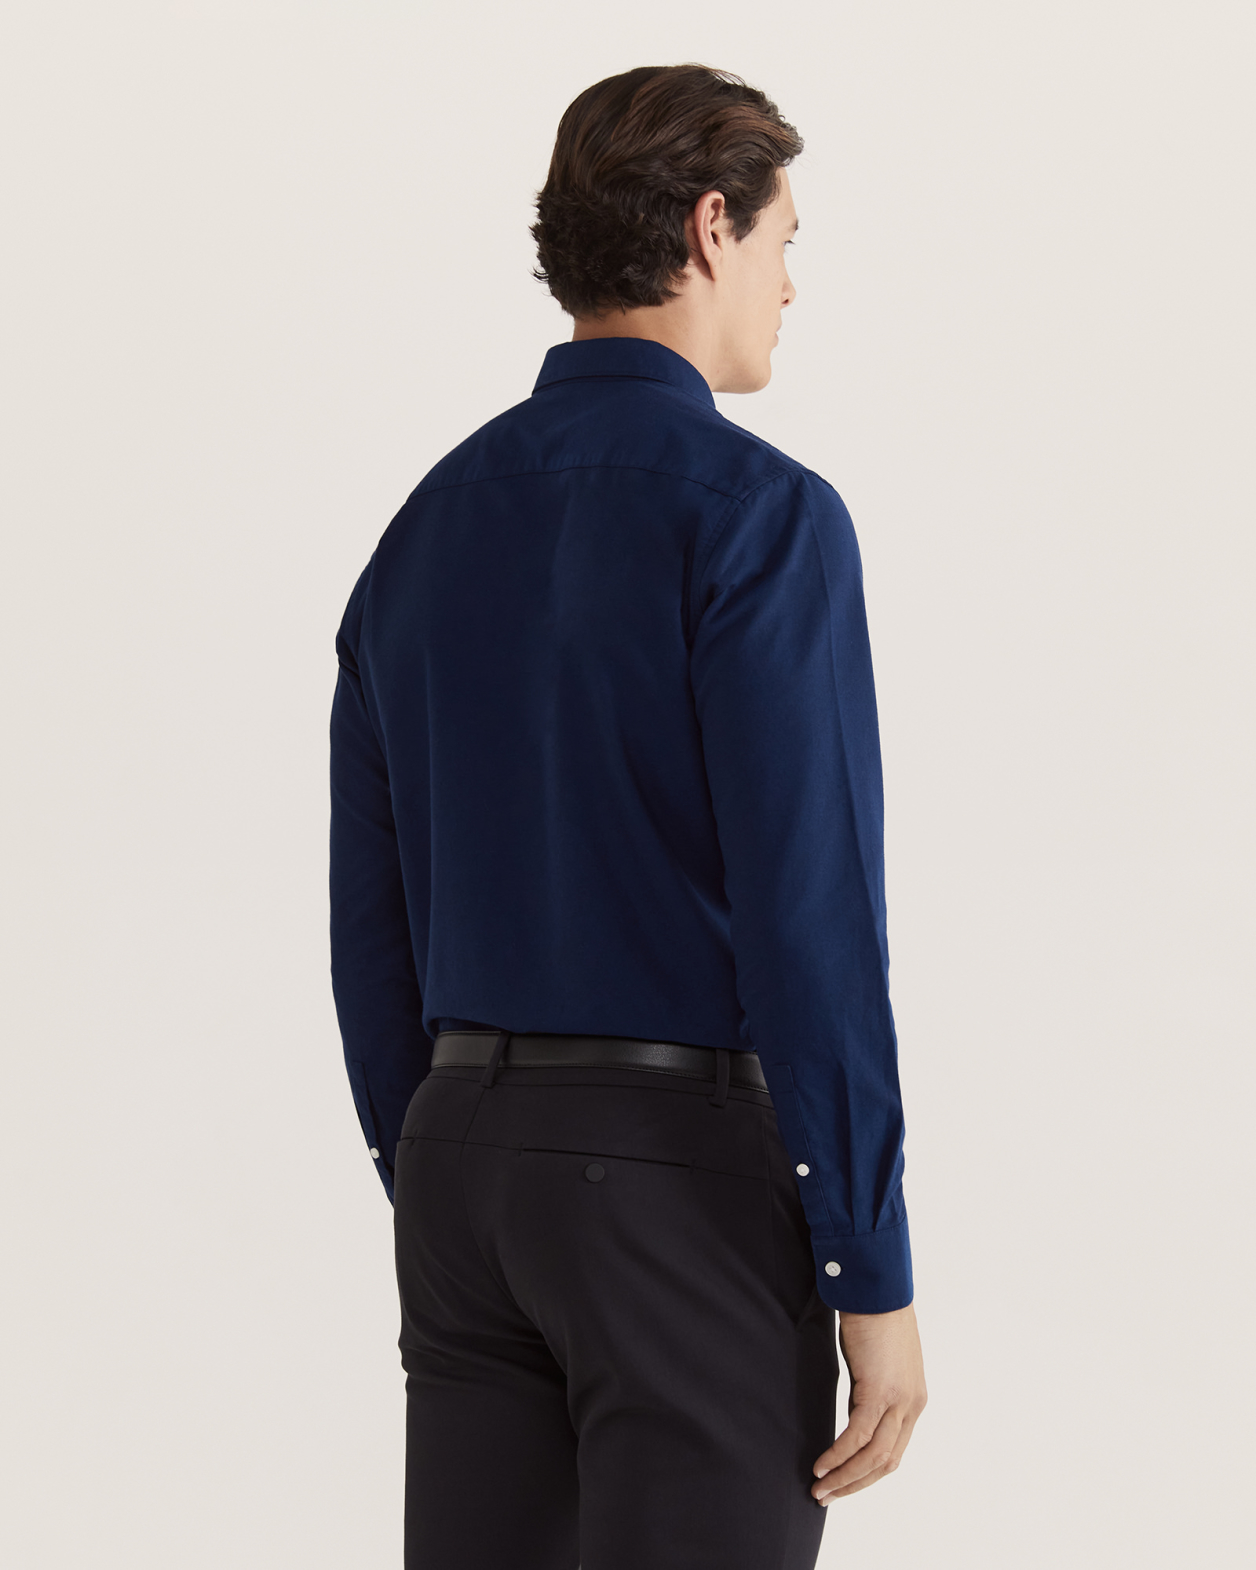 Christopher Oxford Long Sleeve Classic Shirt in NAVY